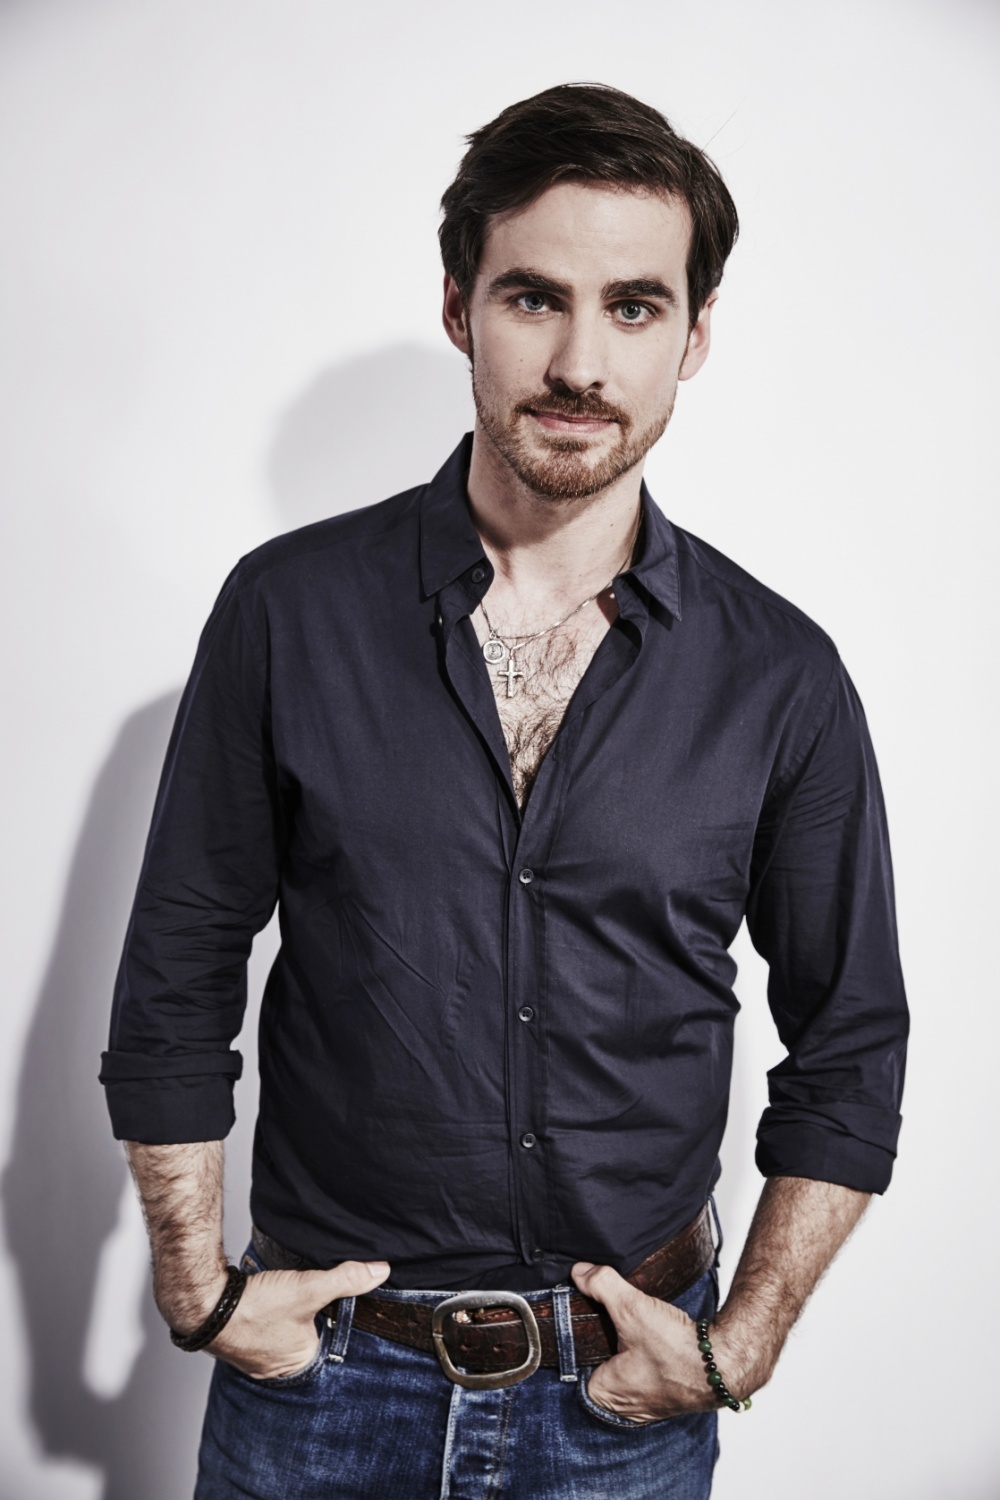 Colin O Donoghue Photo 43 Of 69 Pics Wallpaper Photo 816718 Theplace2